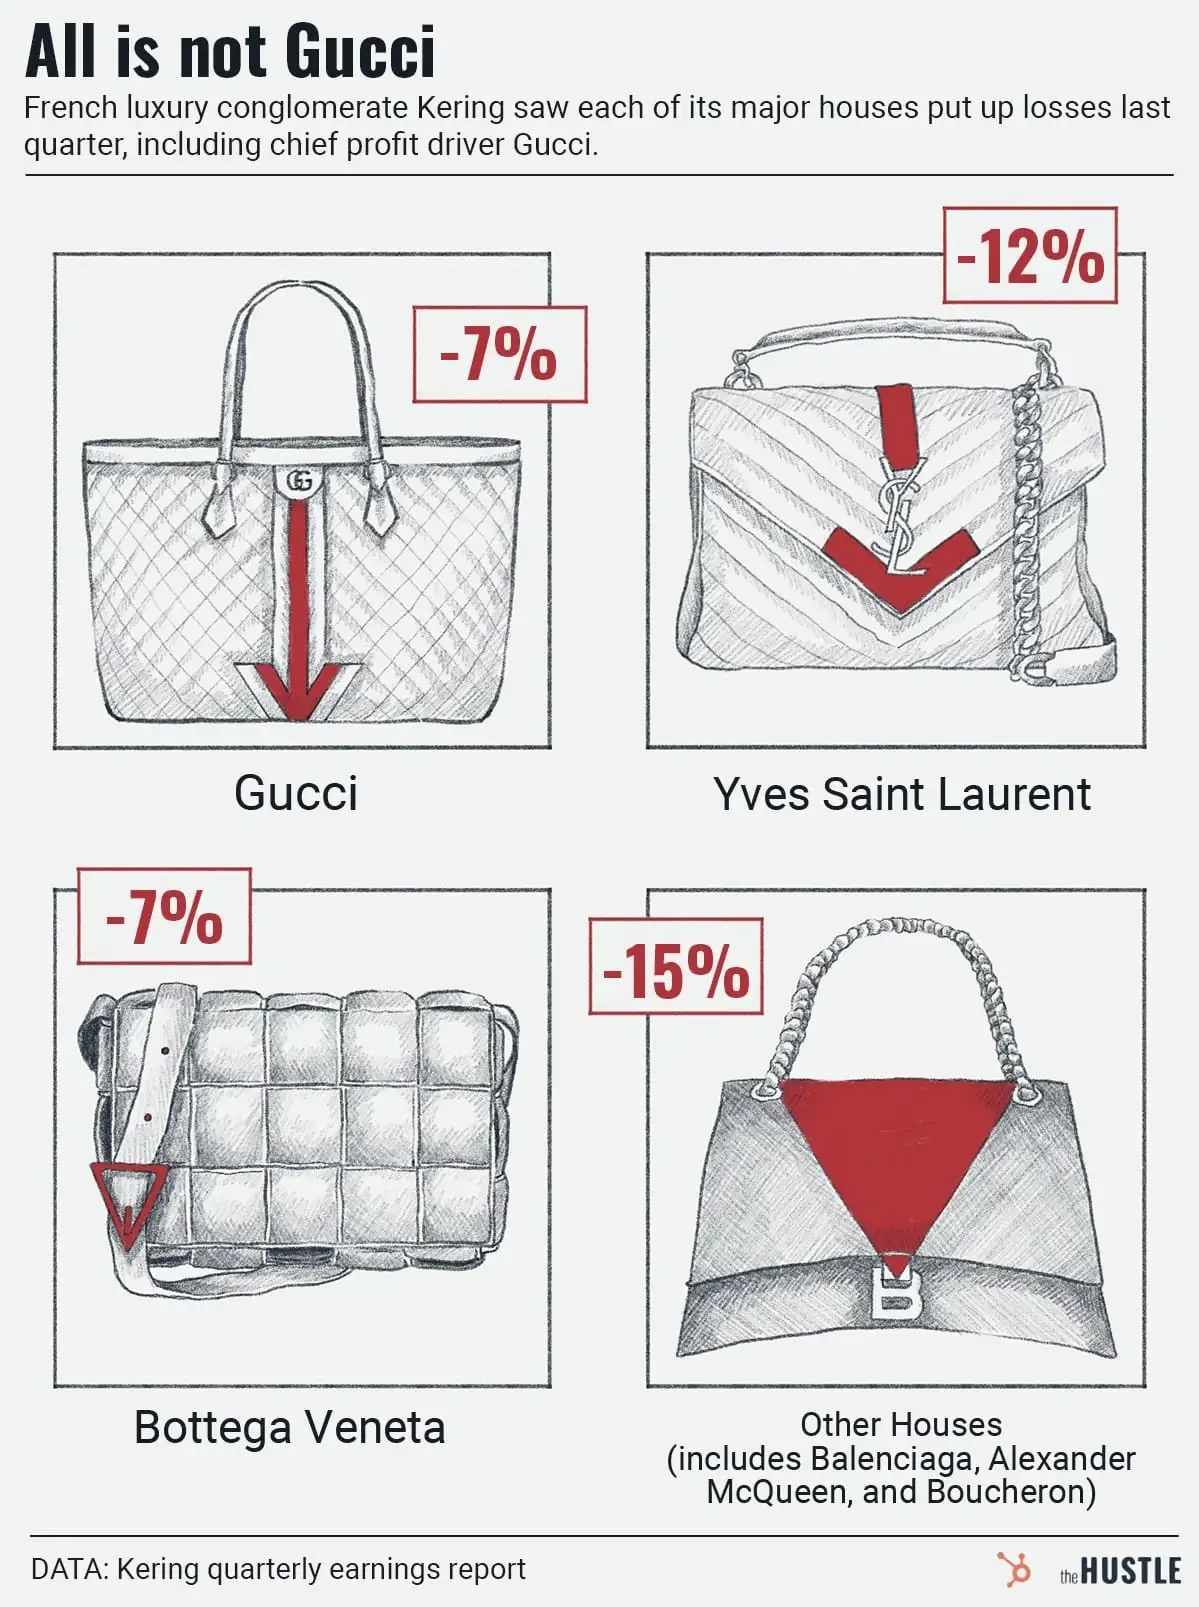 Prestigious brand 'Louis Vuitton' puts on sale the bag with the